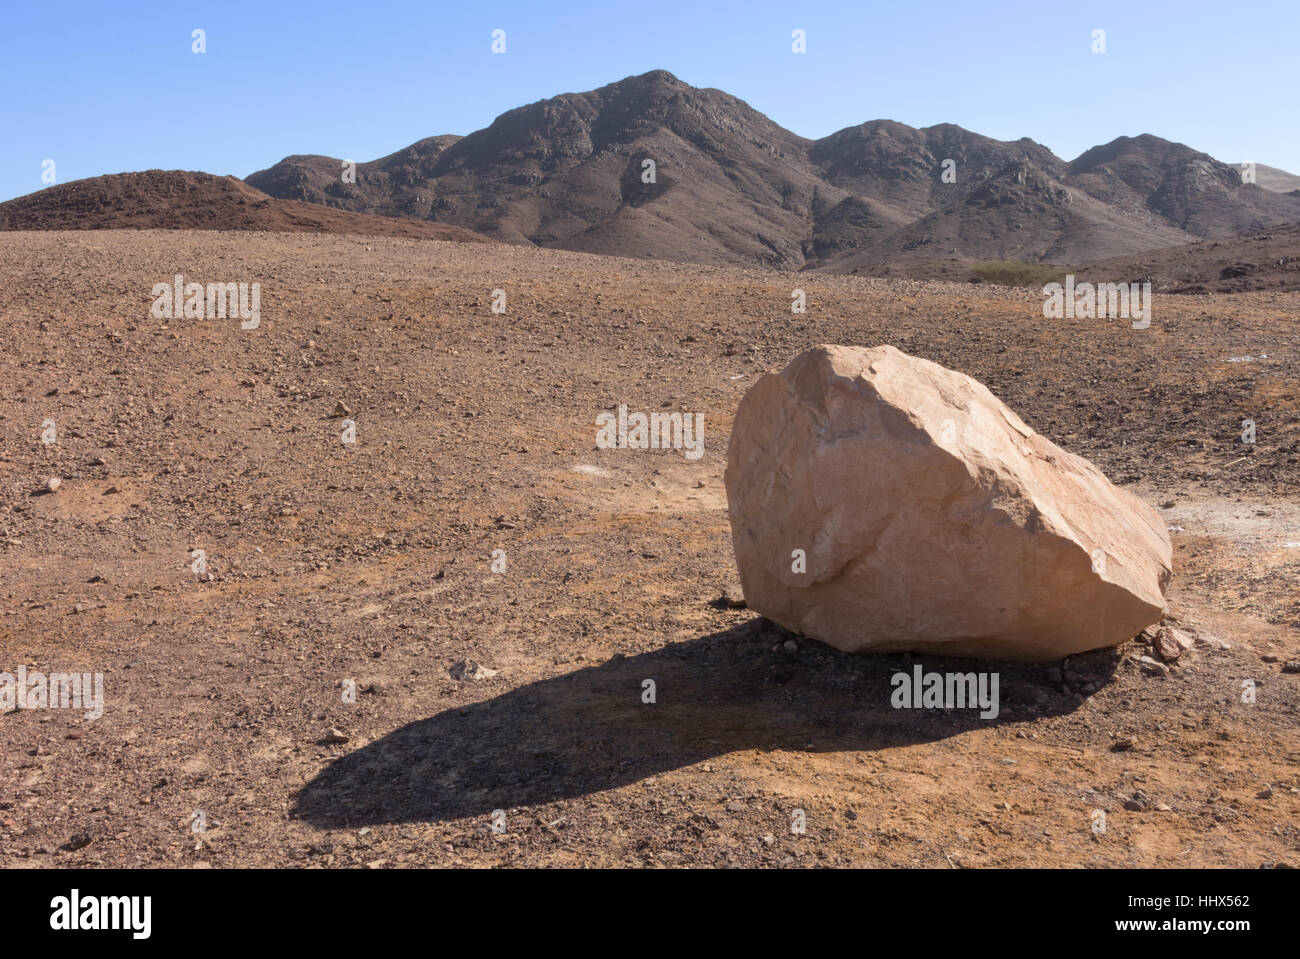 The Negev desert mountains in Southern Israel, between Mizpe Rampn and Eilat Stock Photo